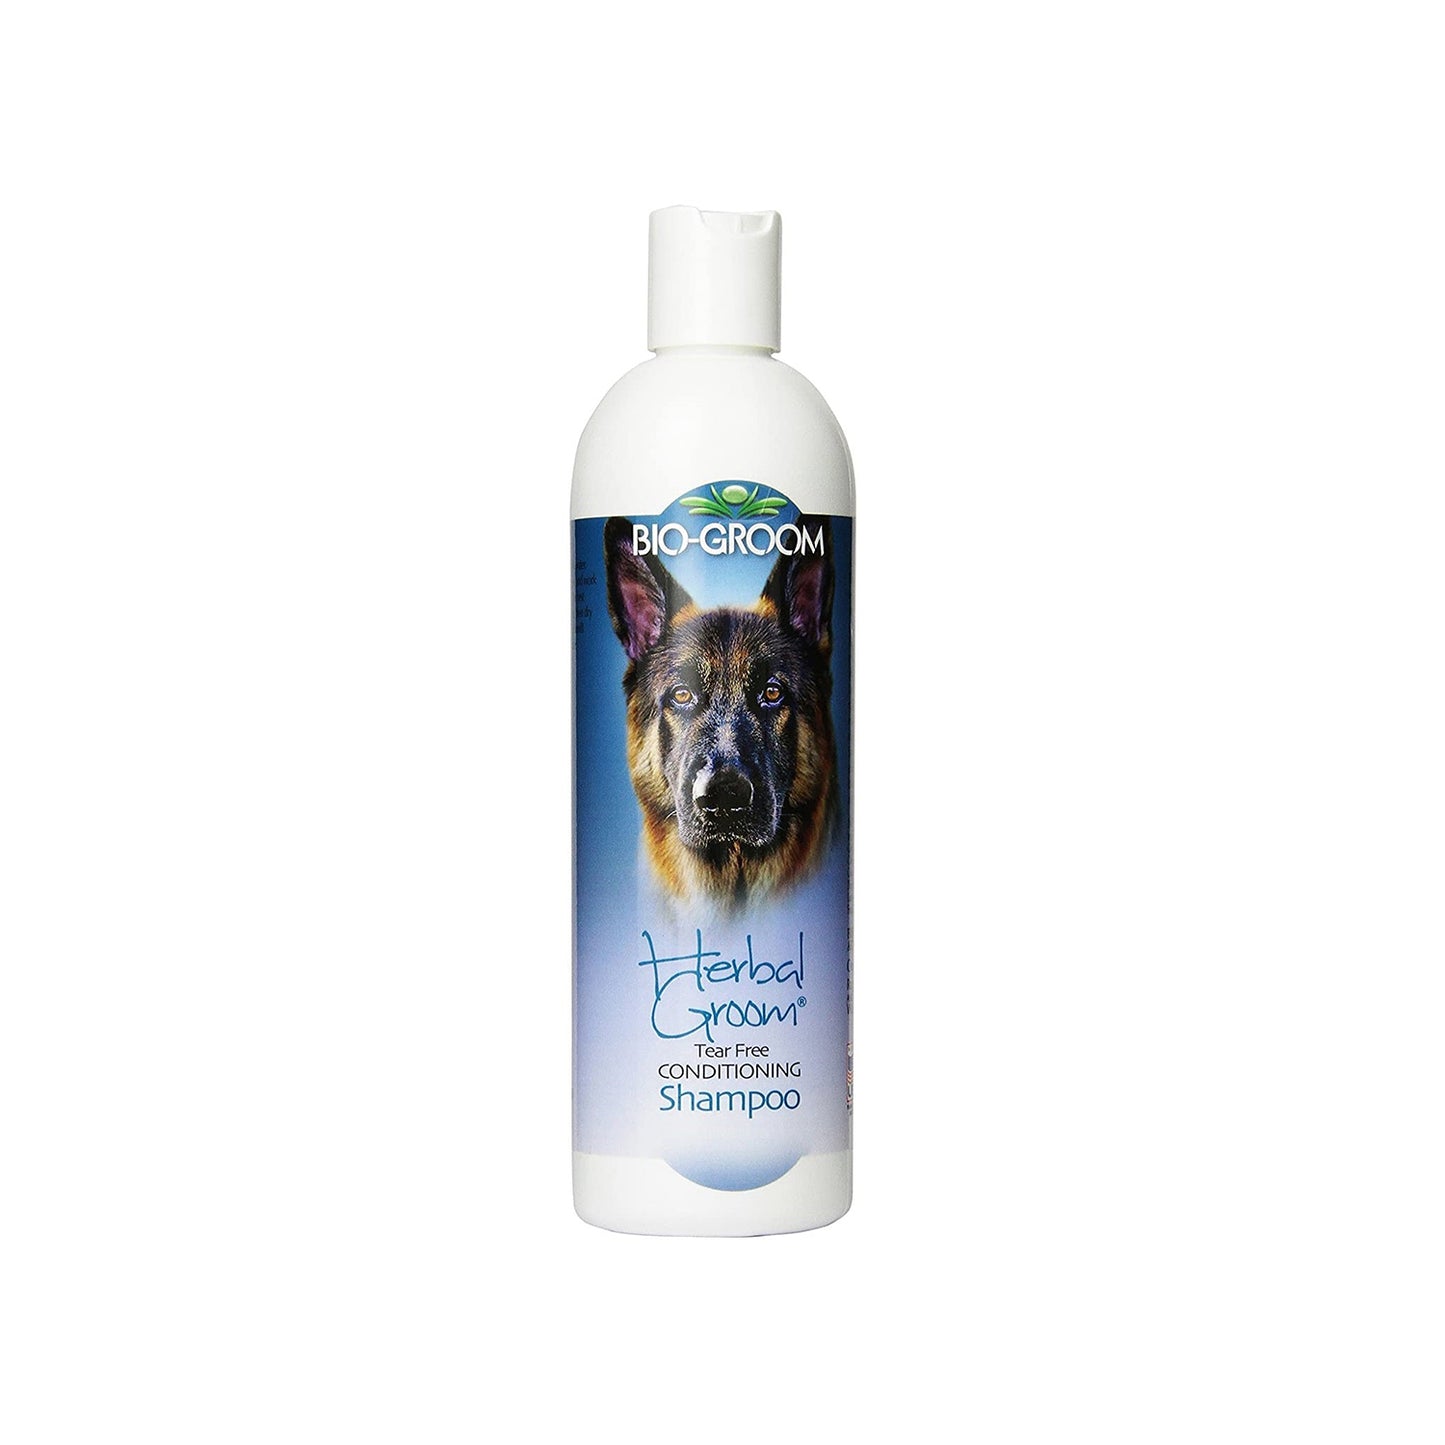 Bio Groom - Herbal Groom Conditioning Shampoo For Dogs & Cats